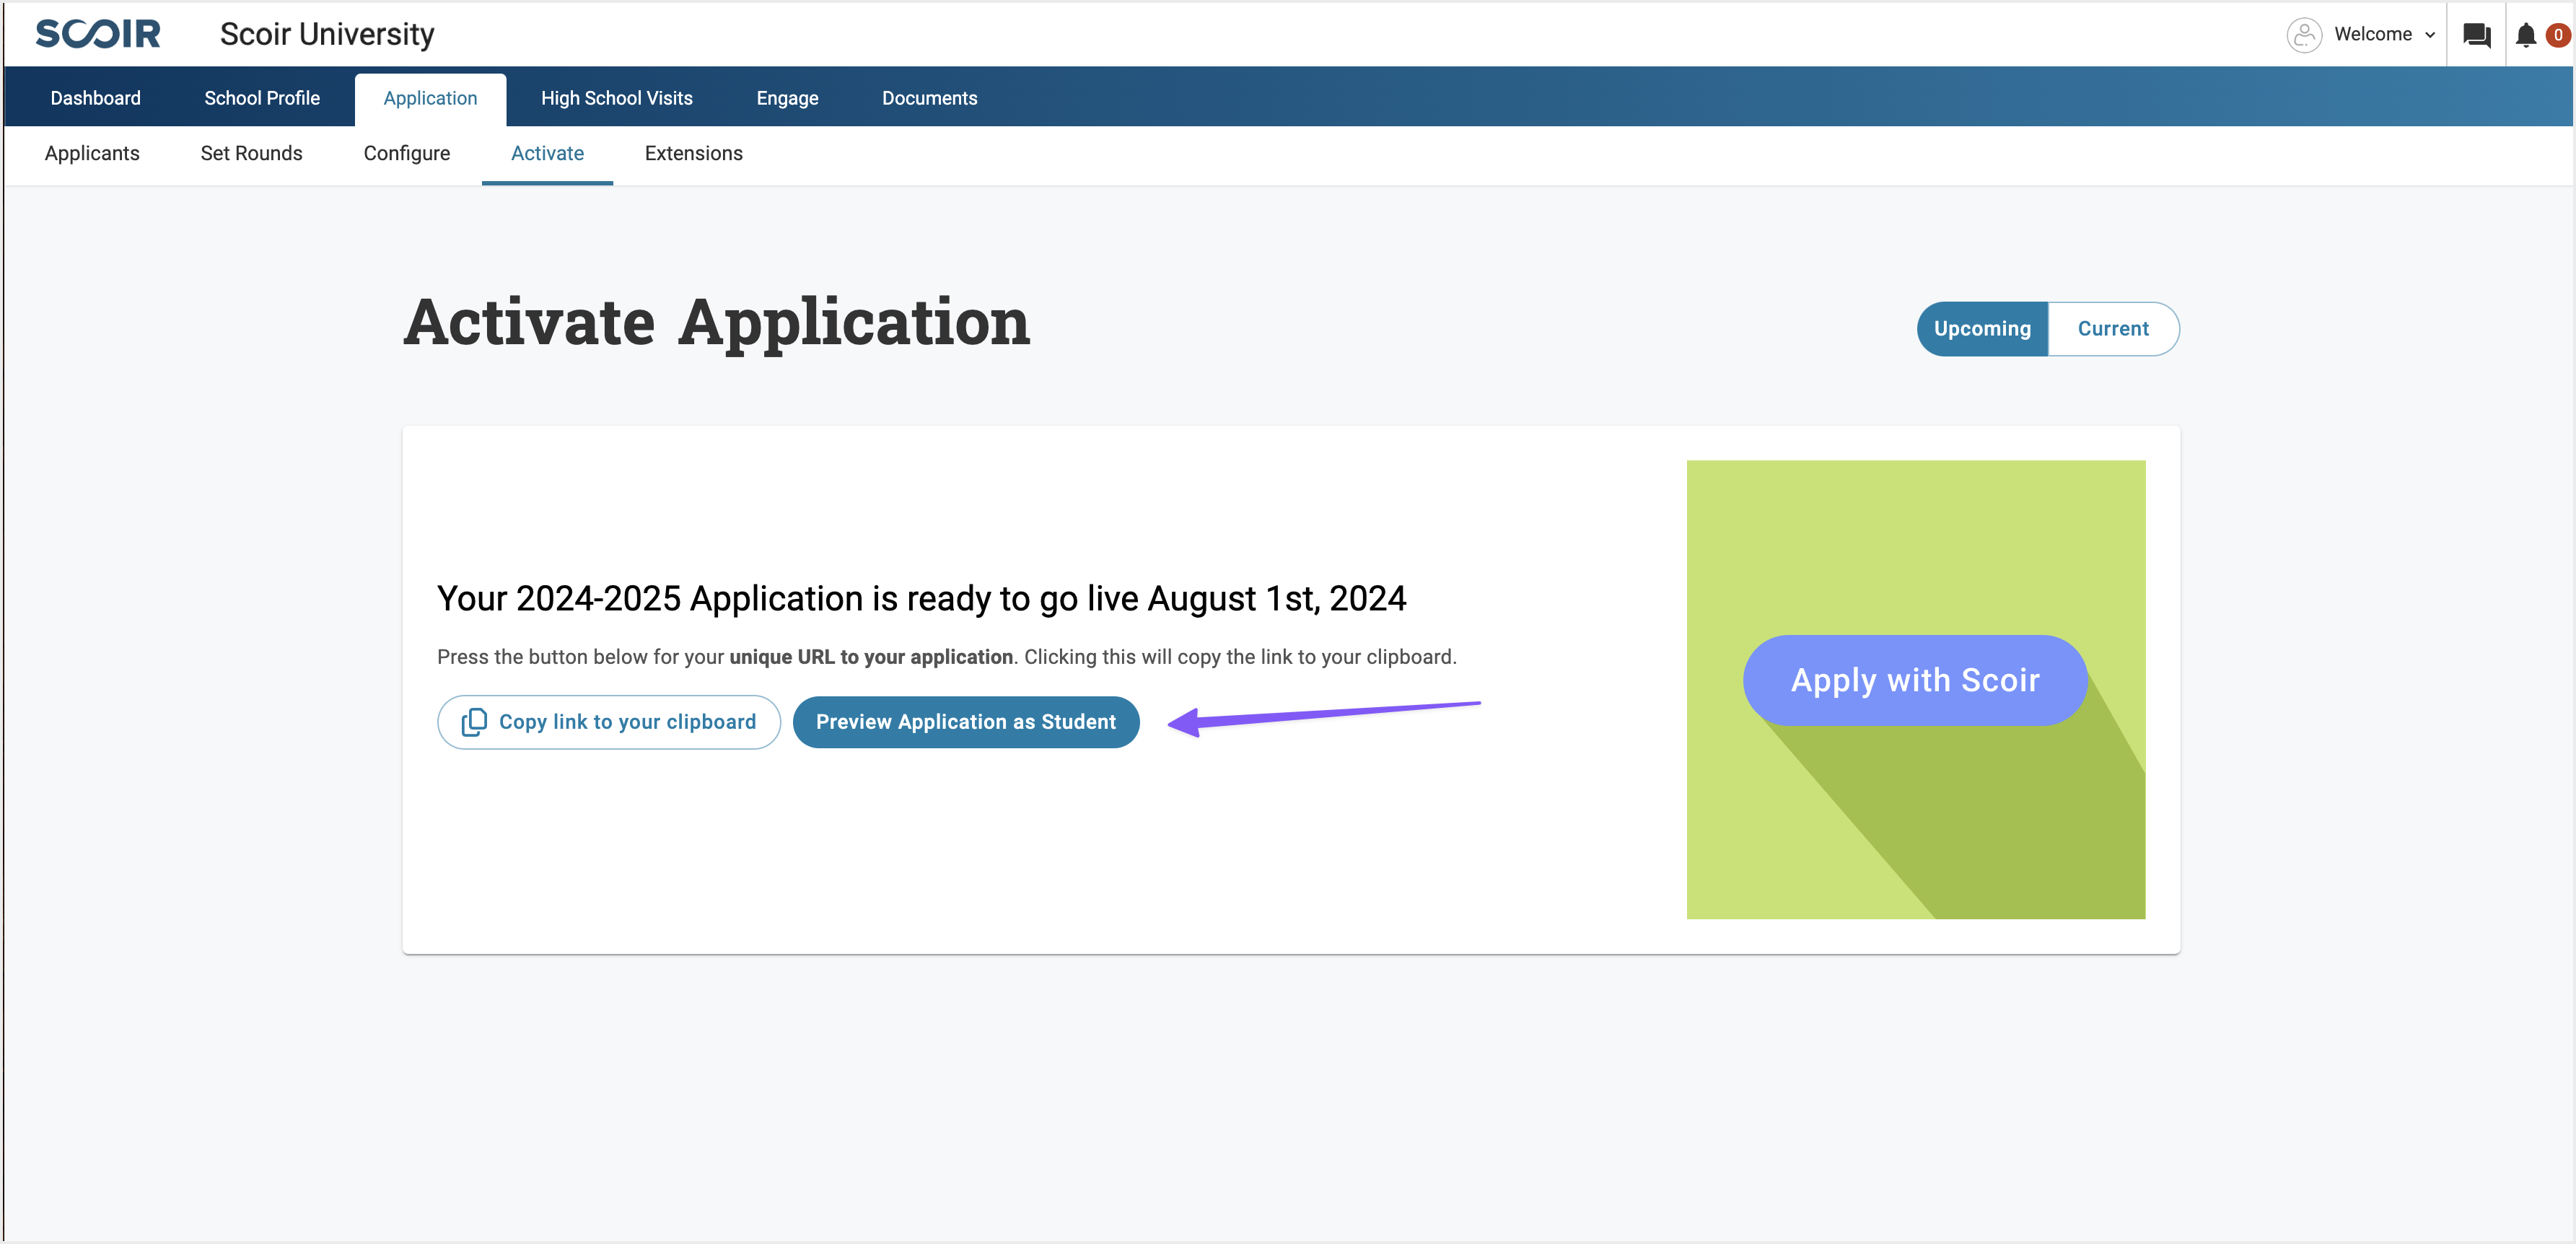 Preview Application as Student button on final Activation page